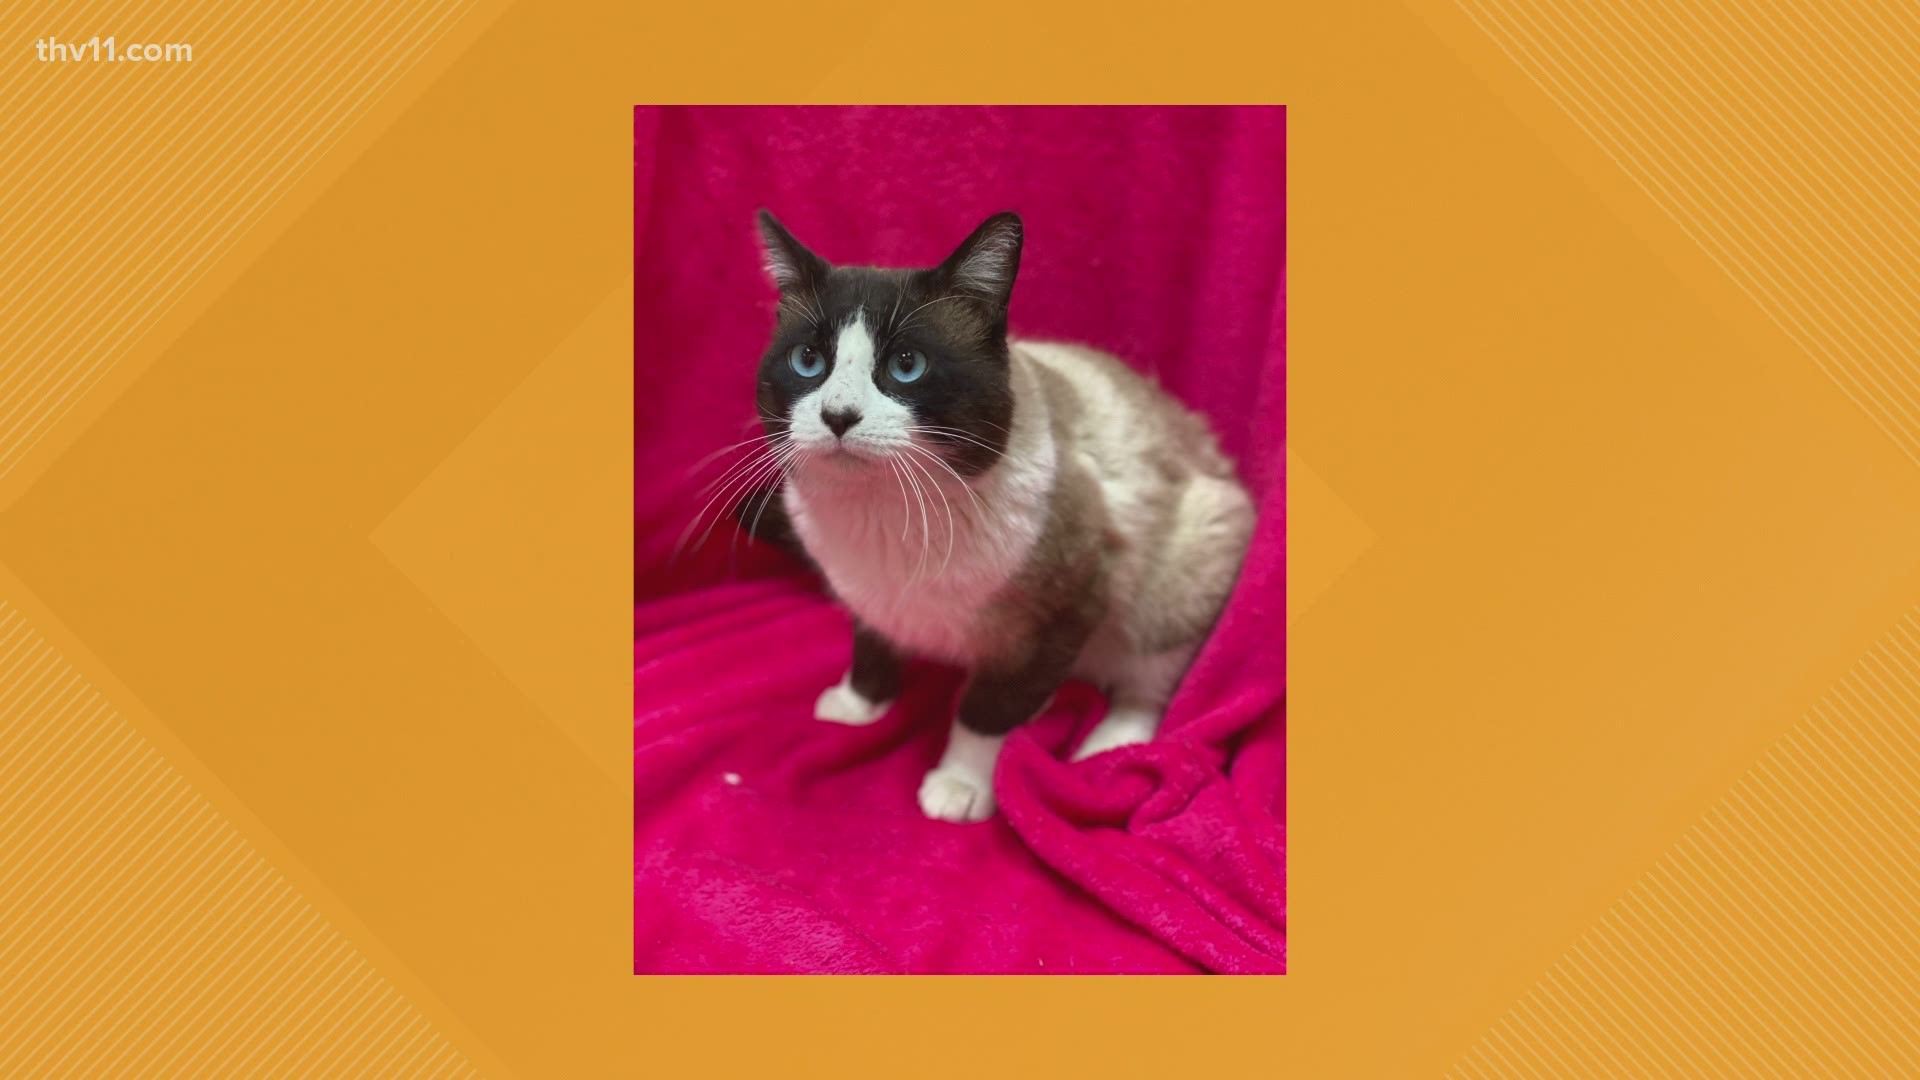 Rudy is a two year old snowshoe cat who is as good looking as he is friendly.